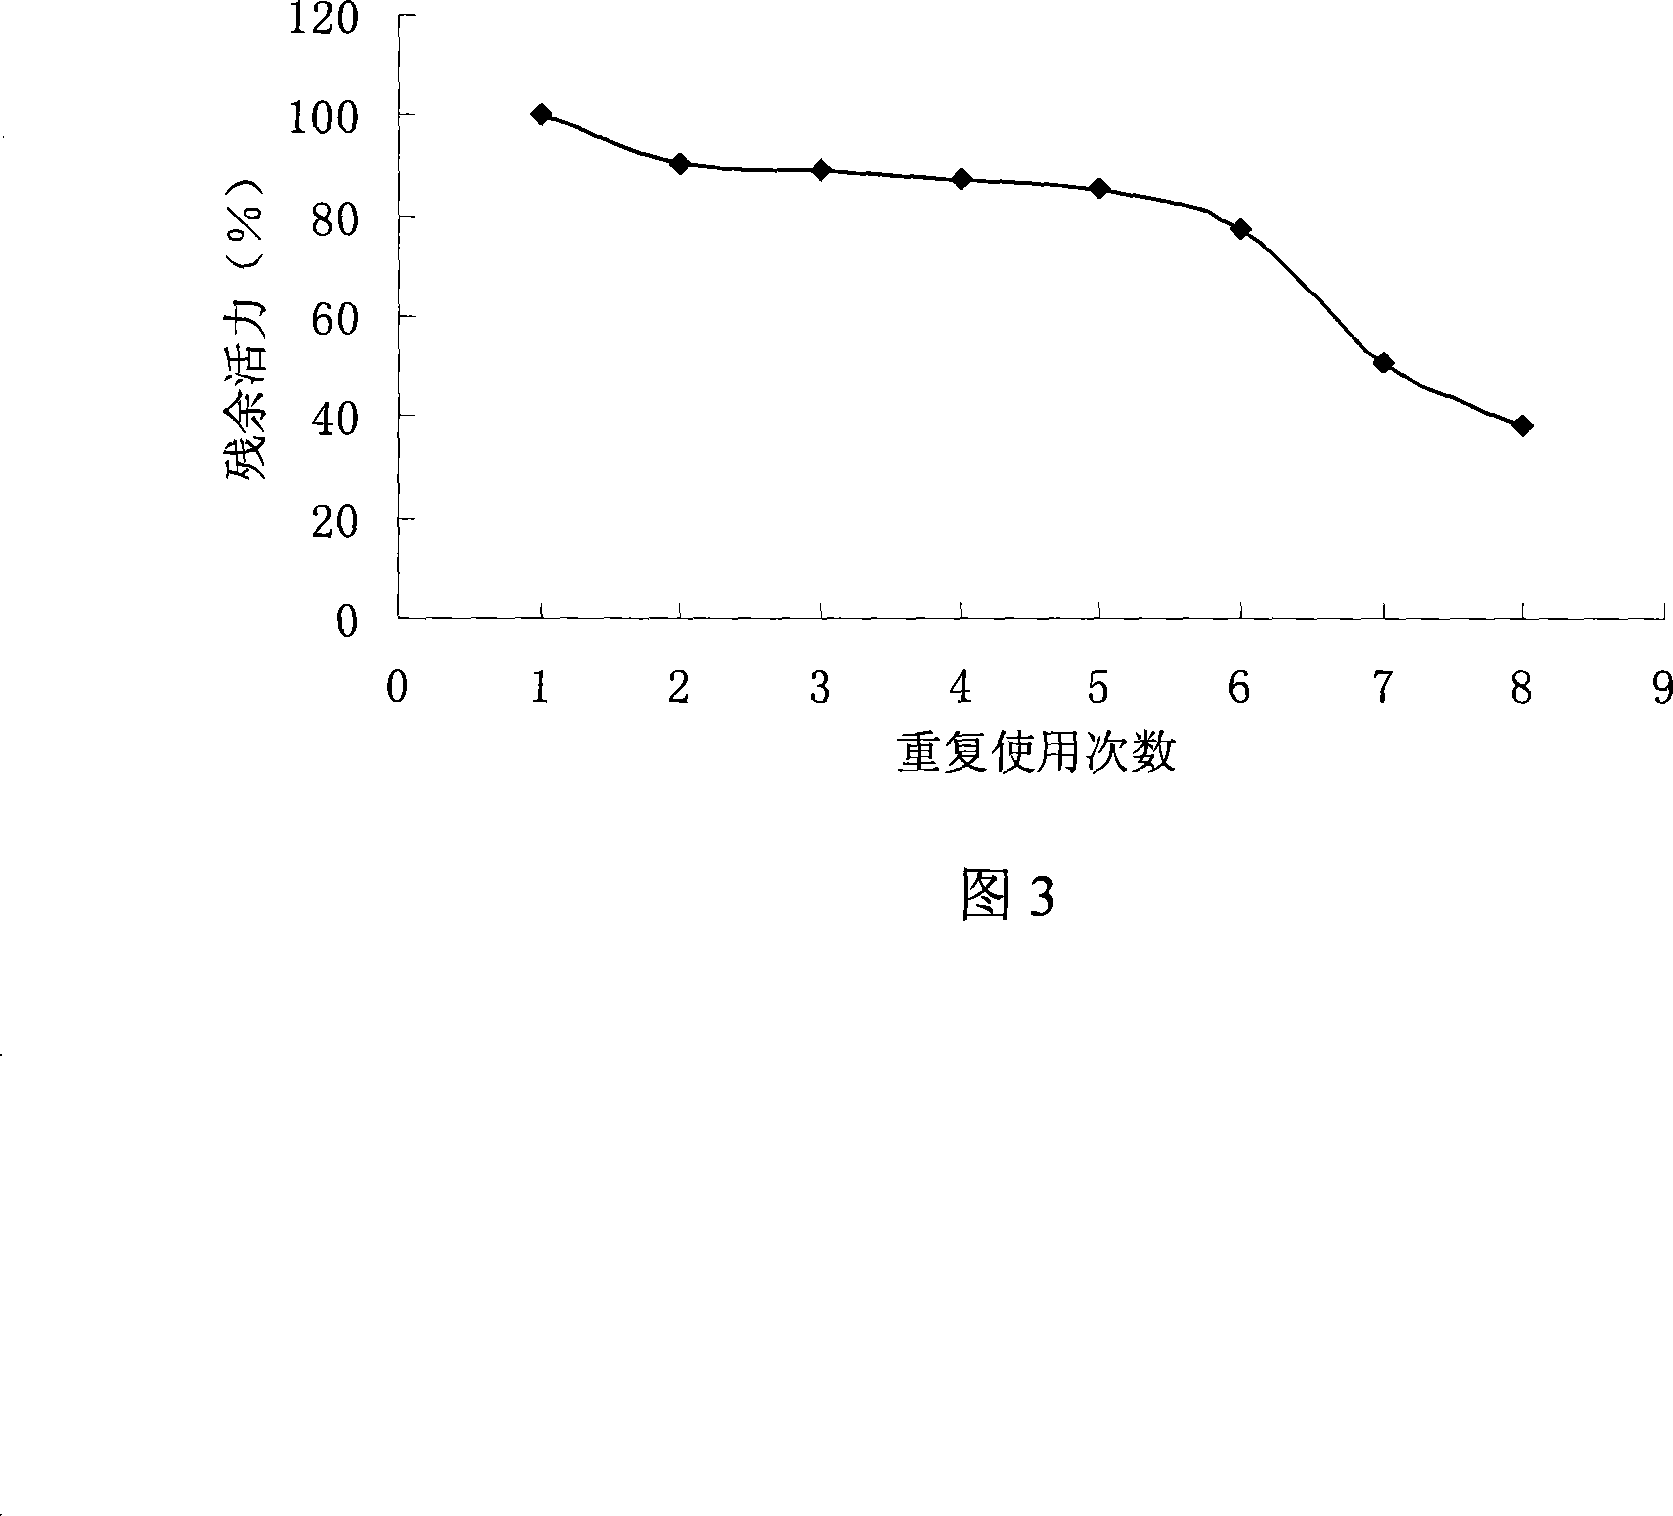 Lactose enzyme and common immobilization method of glucose isomerase